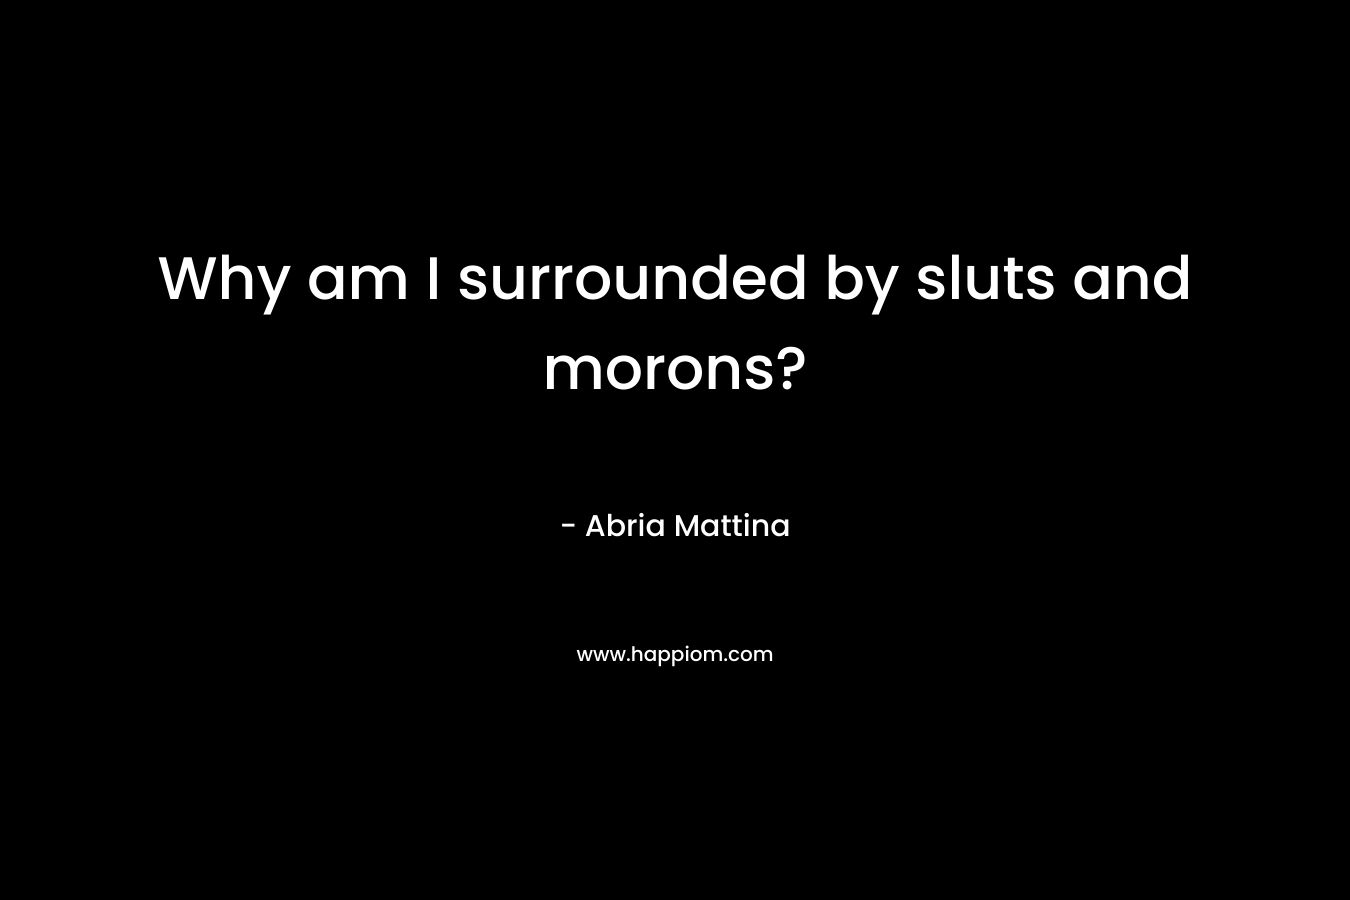 Why am I surrounded by sluts and morons?